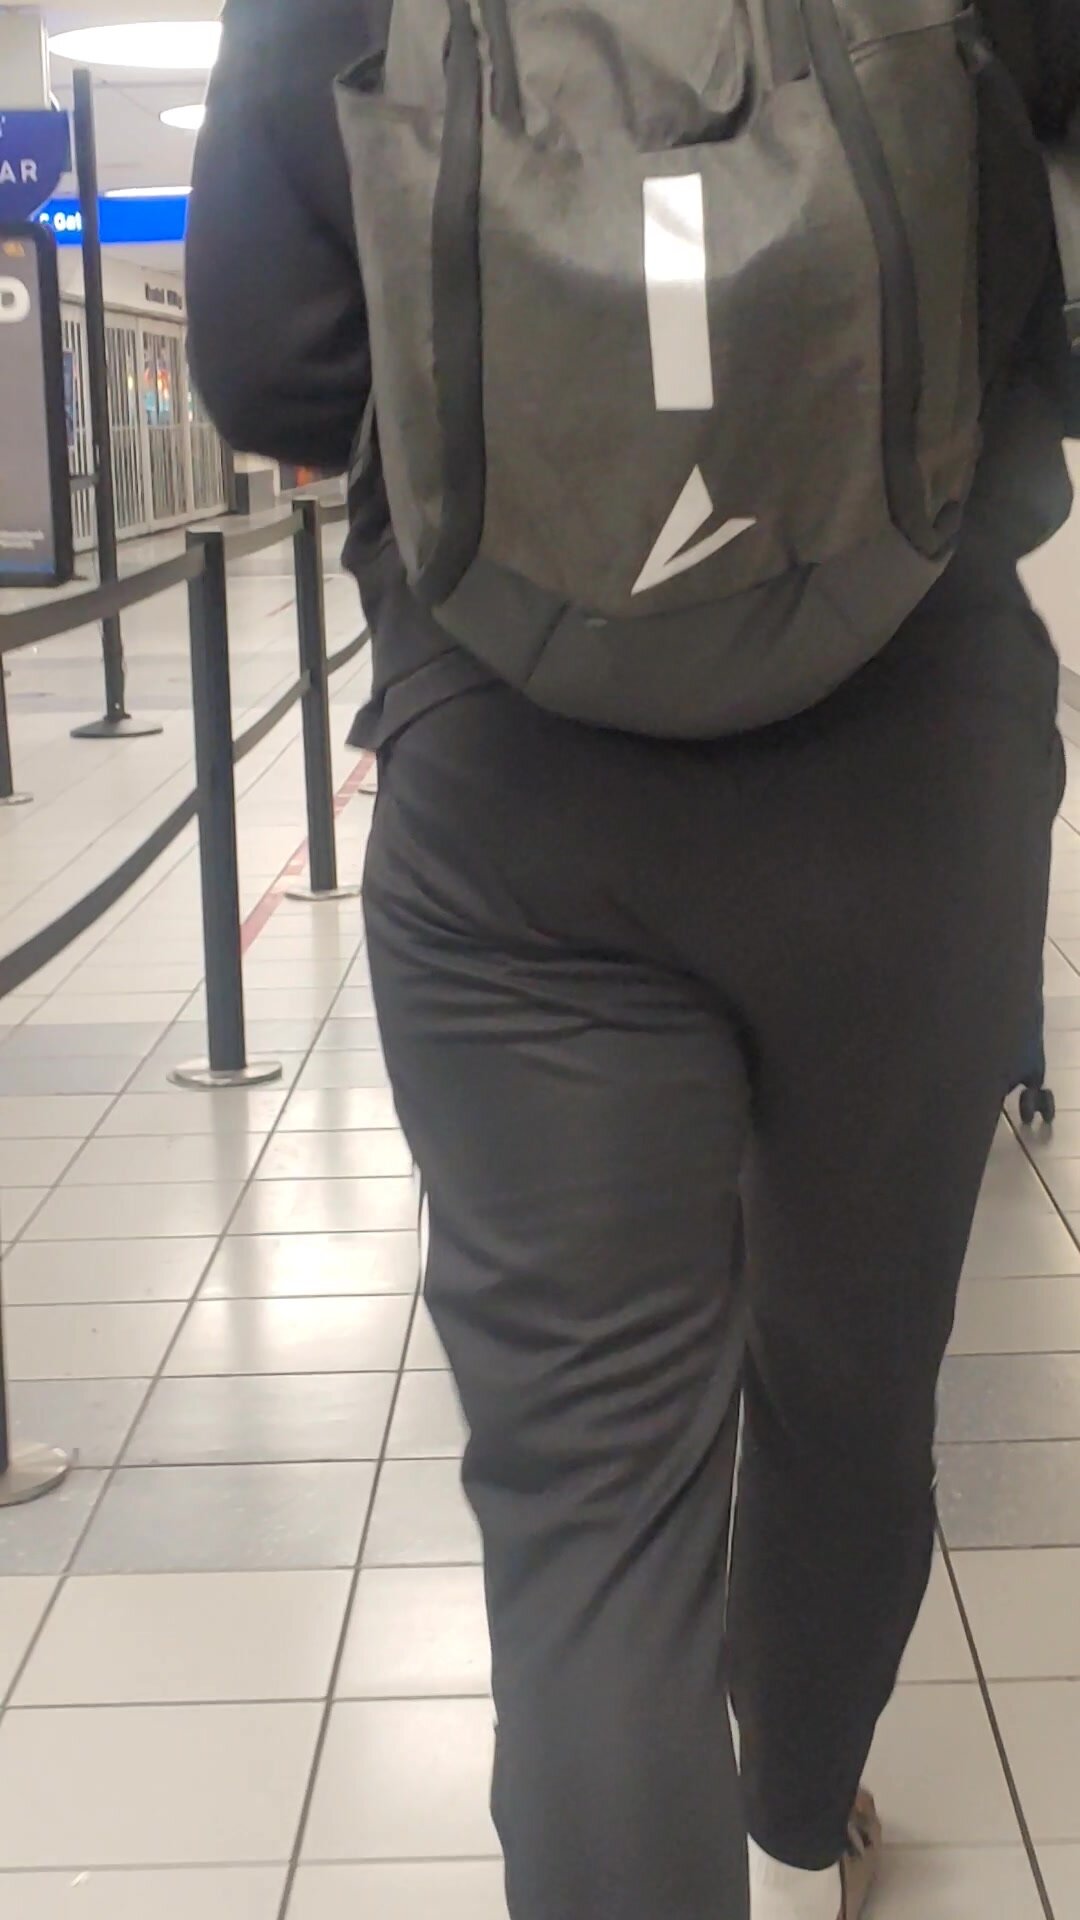 (Part 2) Hot straight booty leaving the airport